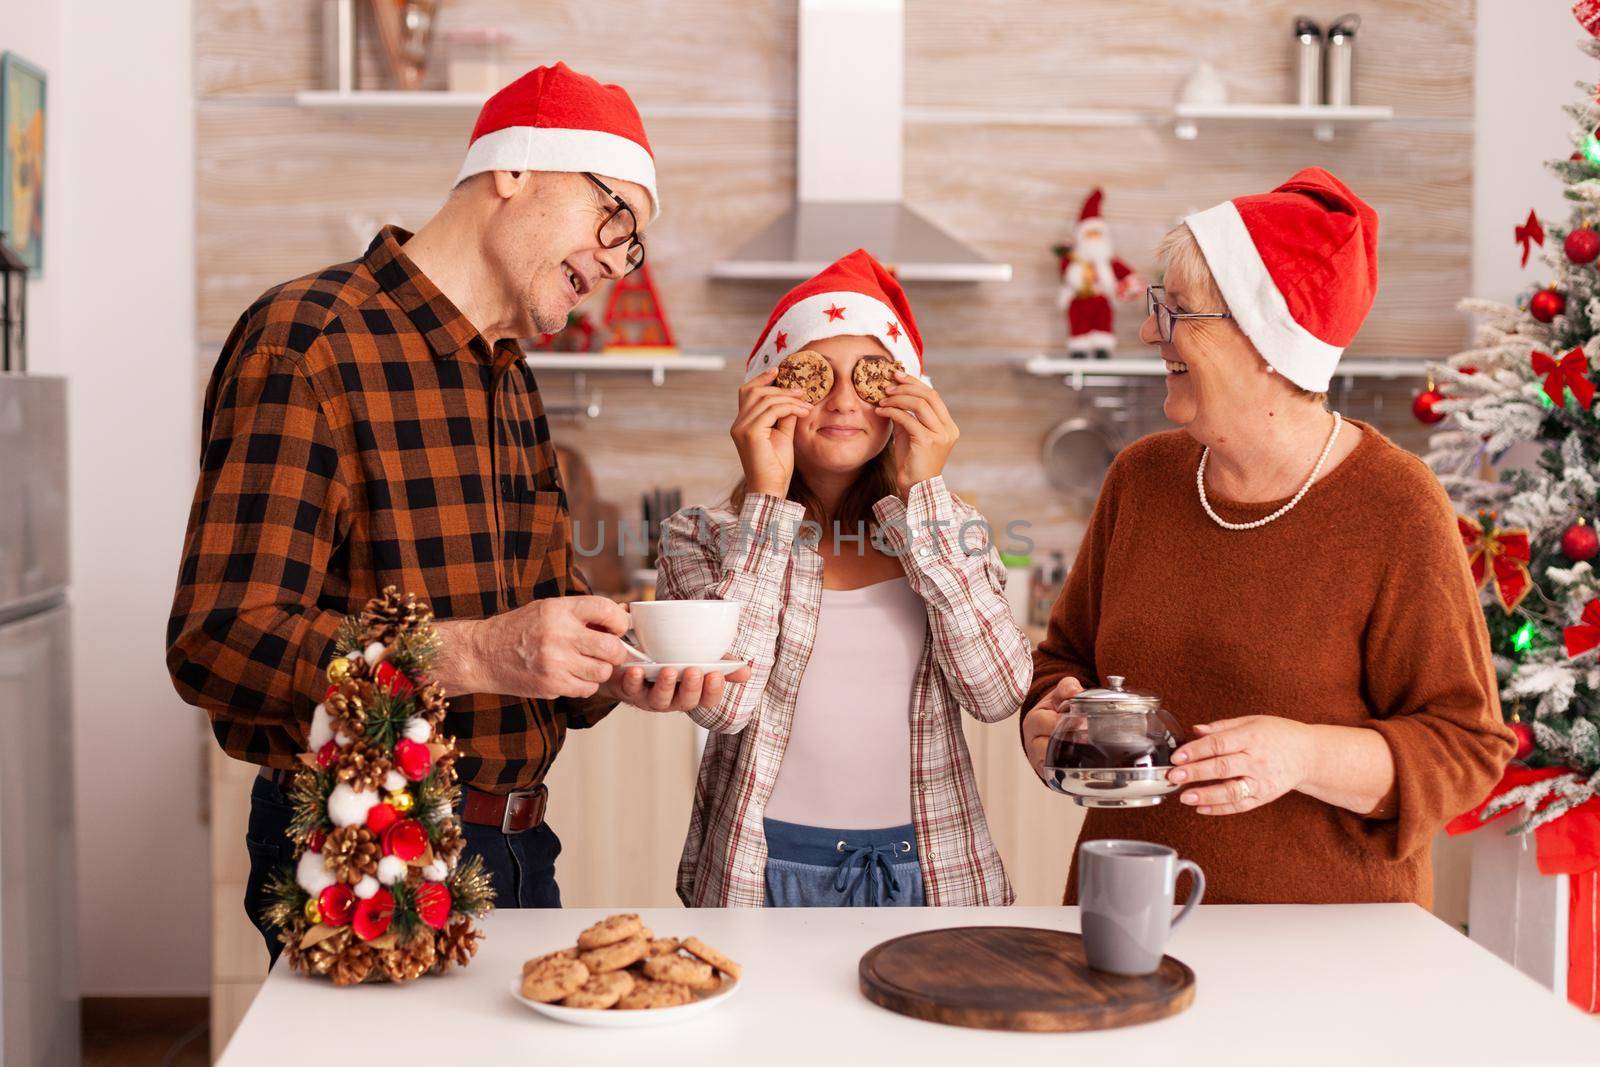 Happy family celebrating christmas holiday spending time together in xmas decorated kitchen by DCStudio